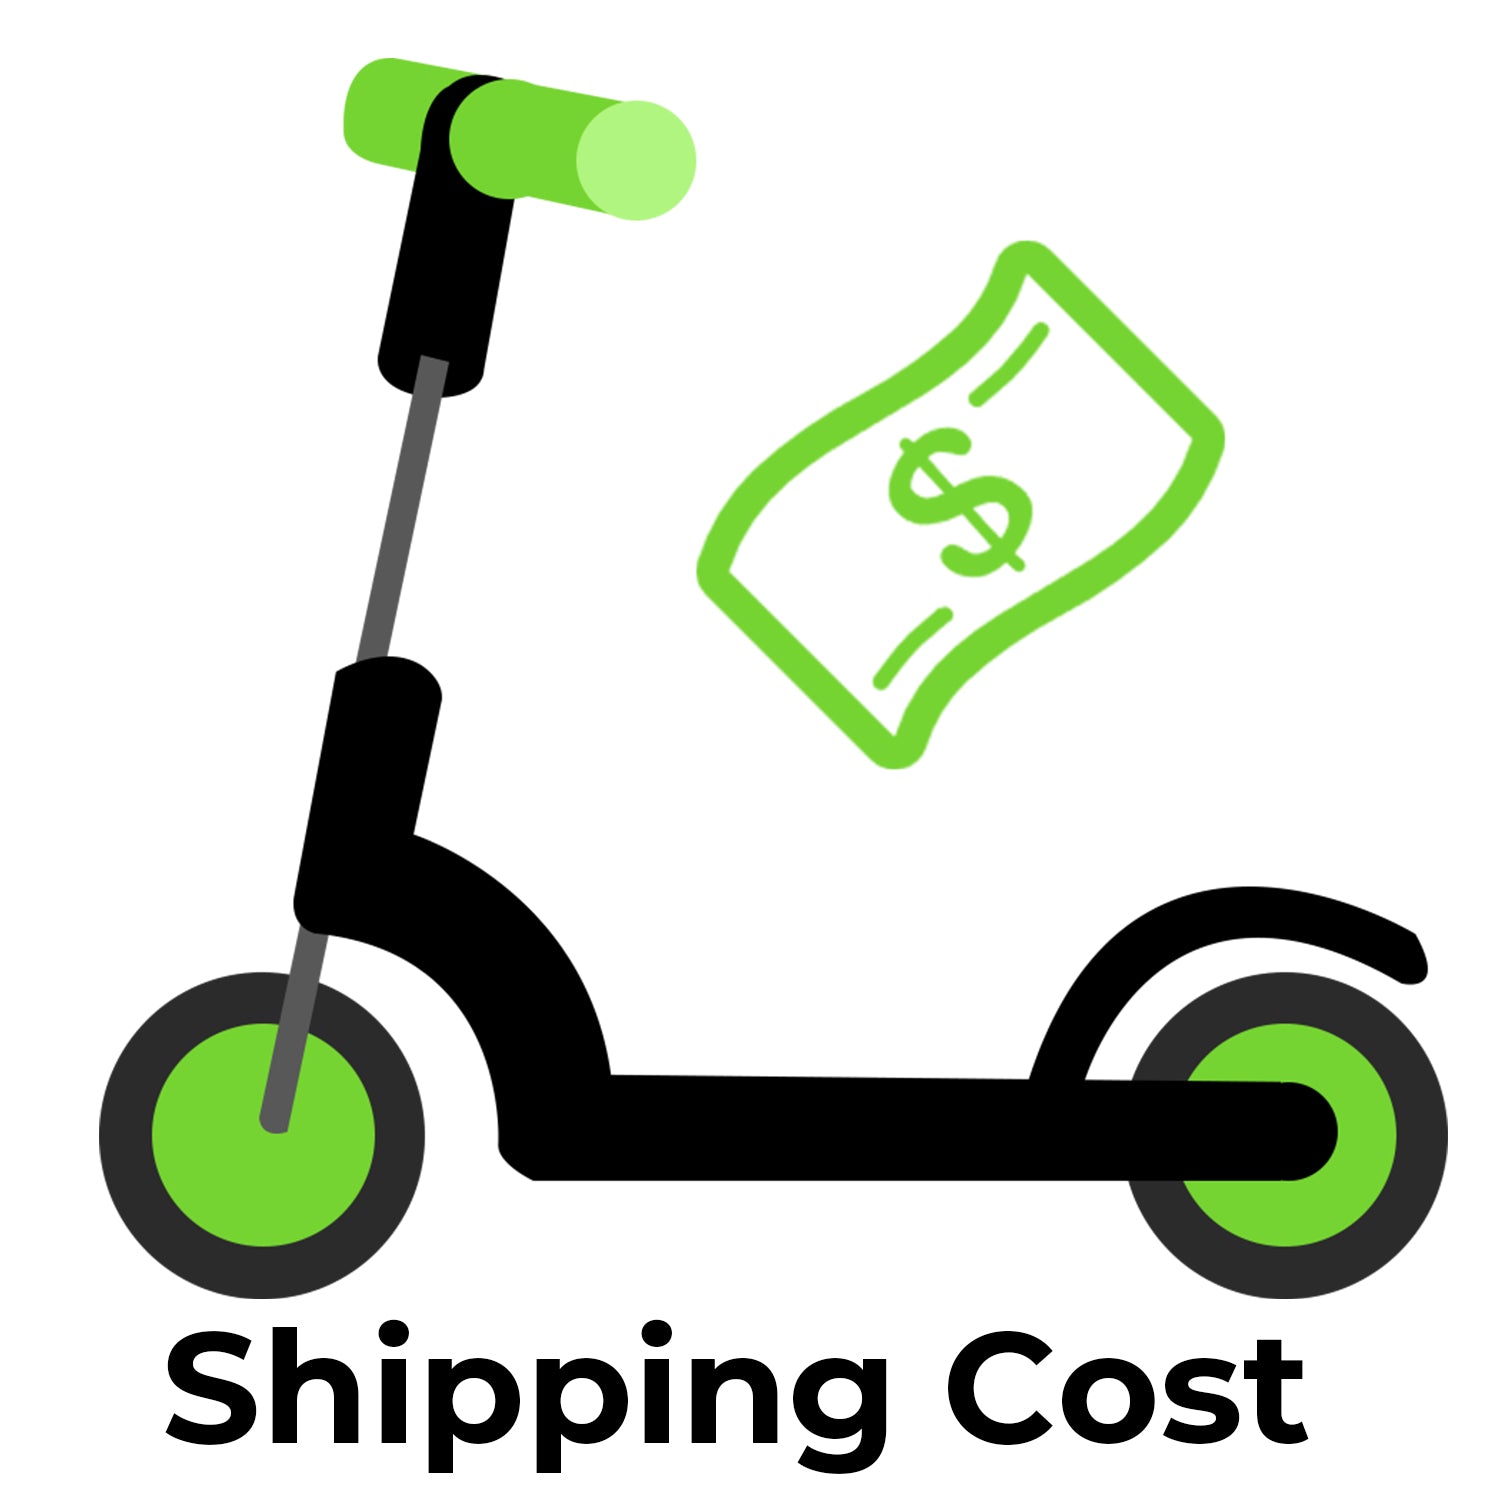 The shipping fees